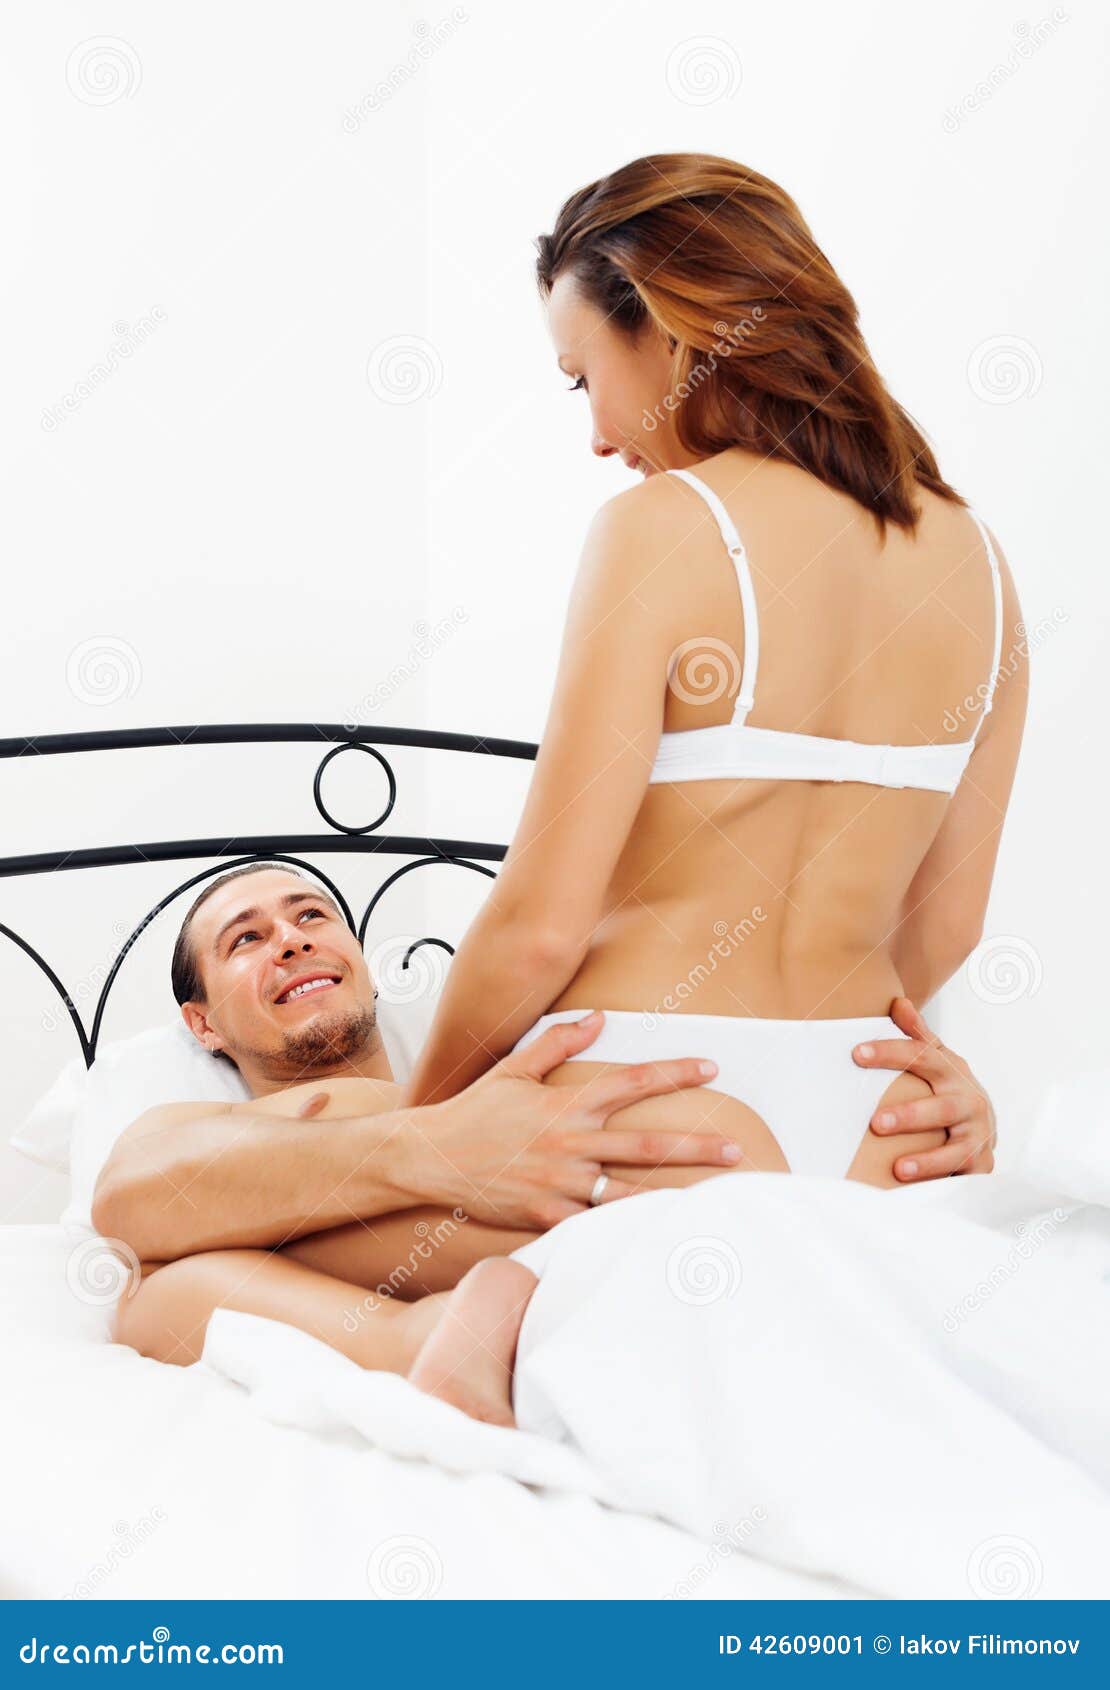 Guy Having Sex with Girl in Bed Stock Image - Image of happiness ...